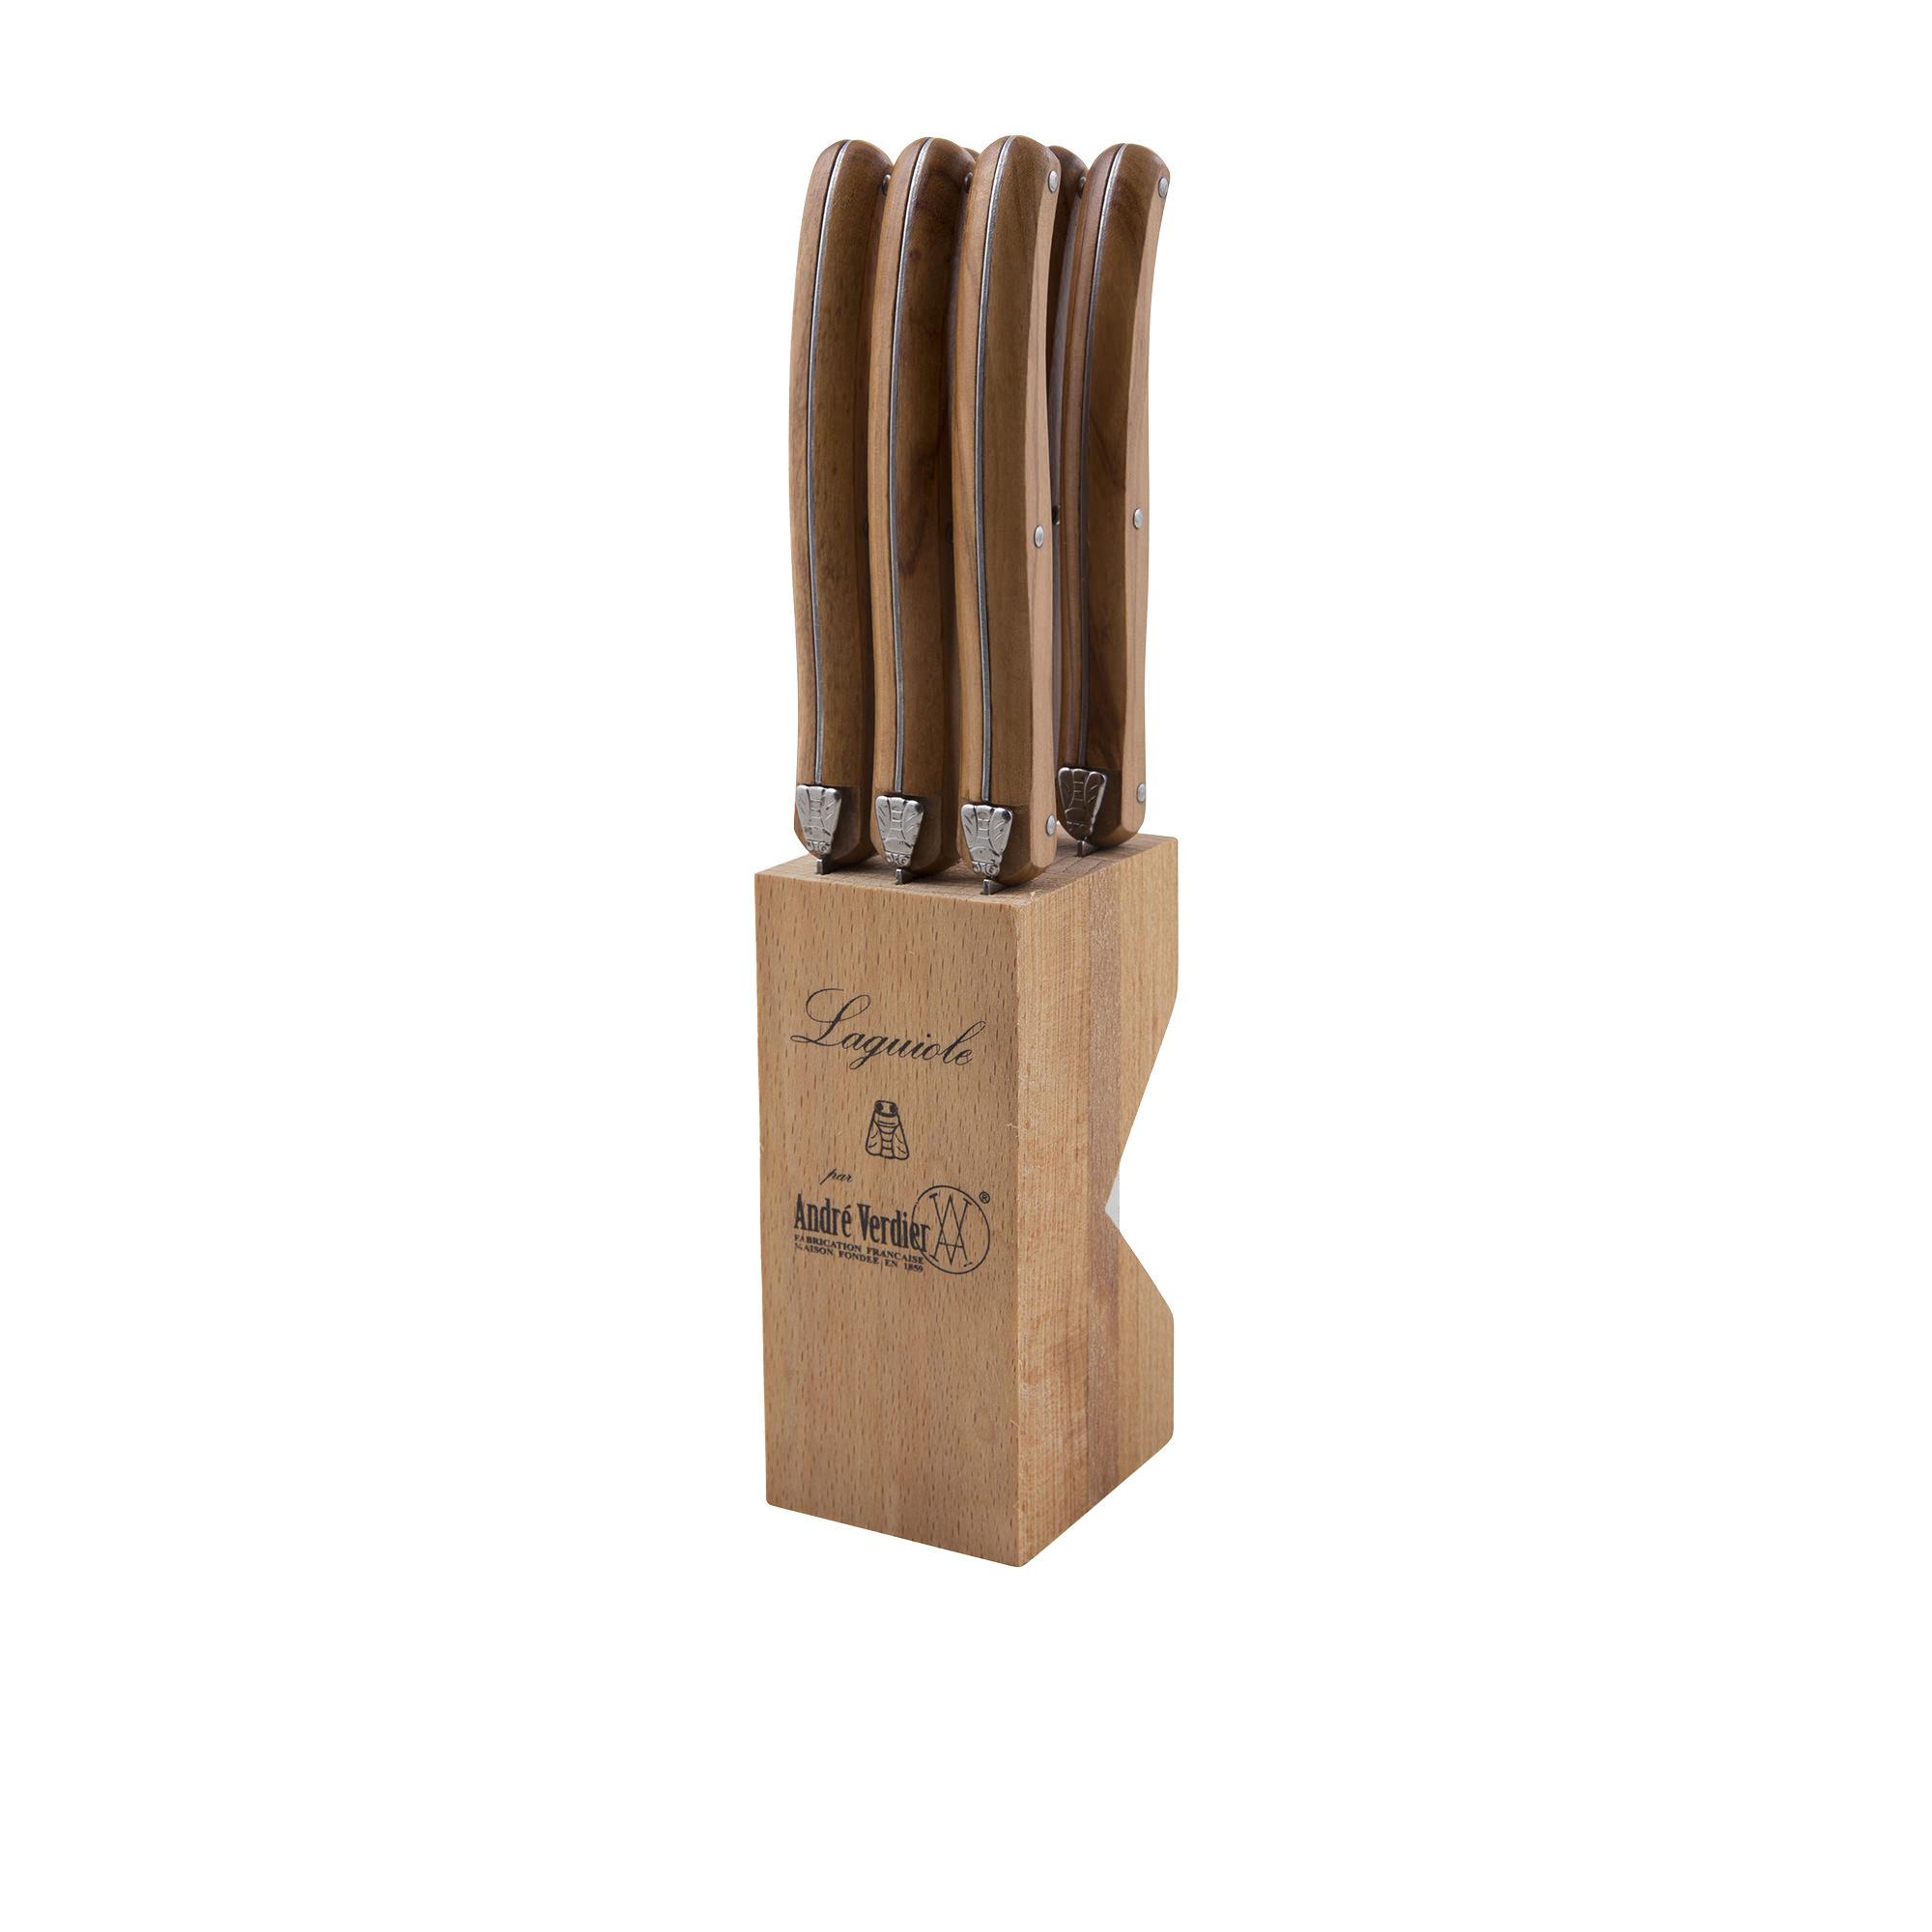 Laguiole by Andre Verdier Debutant Serrated Knife Set 6pc Olive Wood Image 1